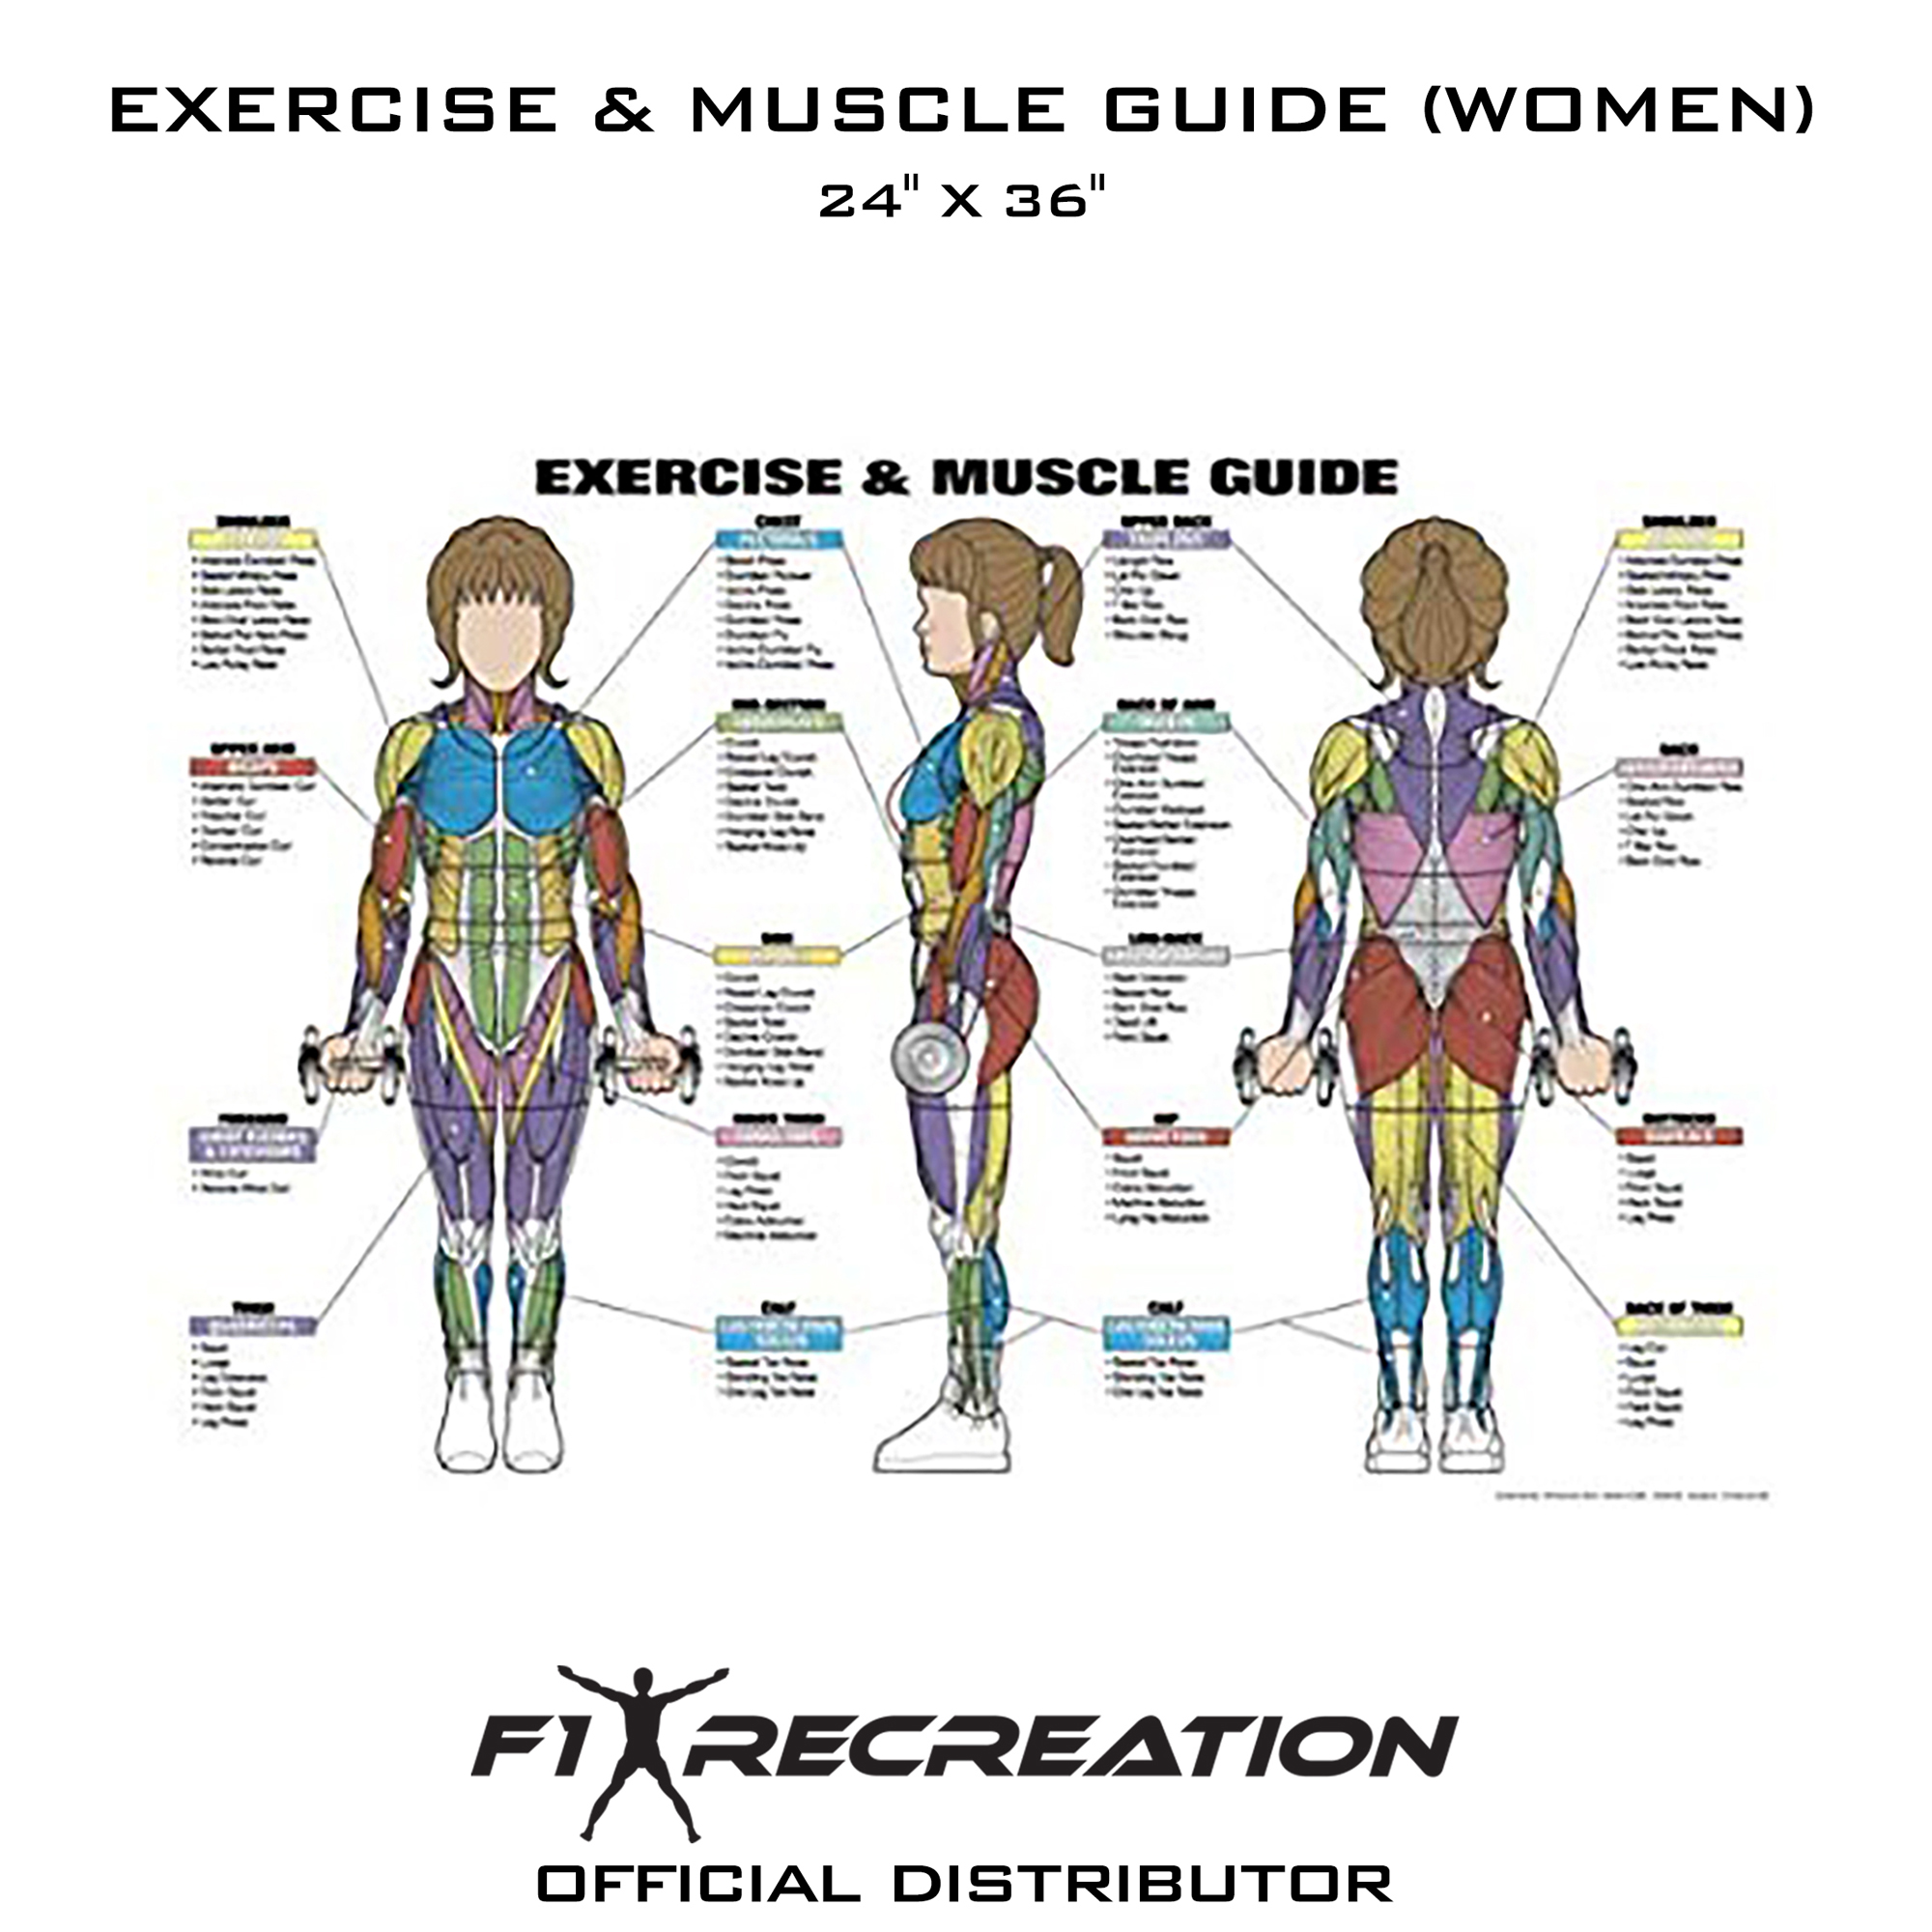 Muscle Group Workout Chart Focus